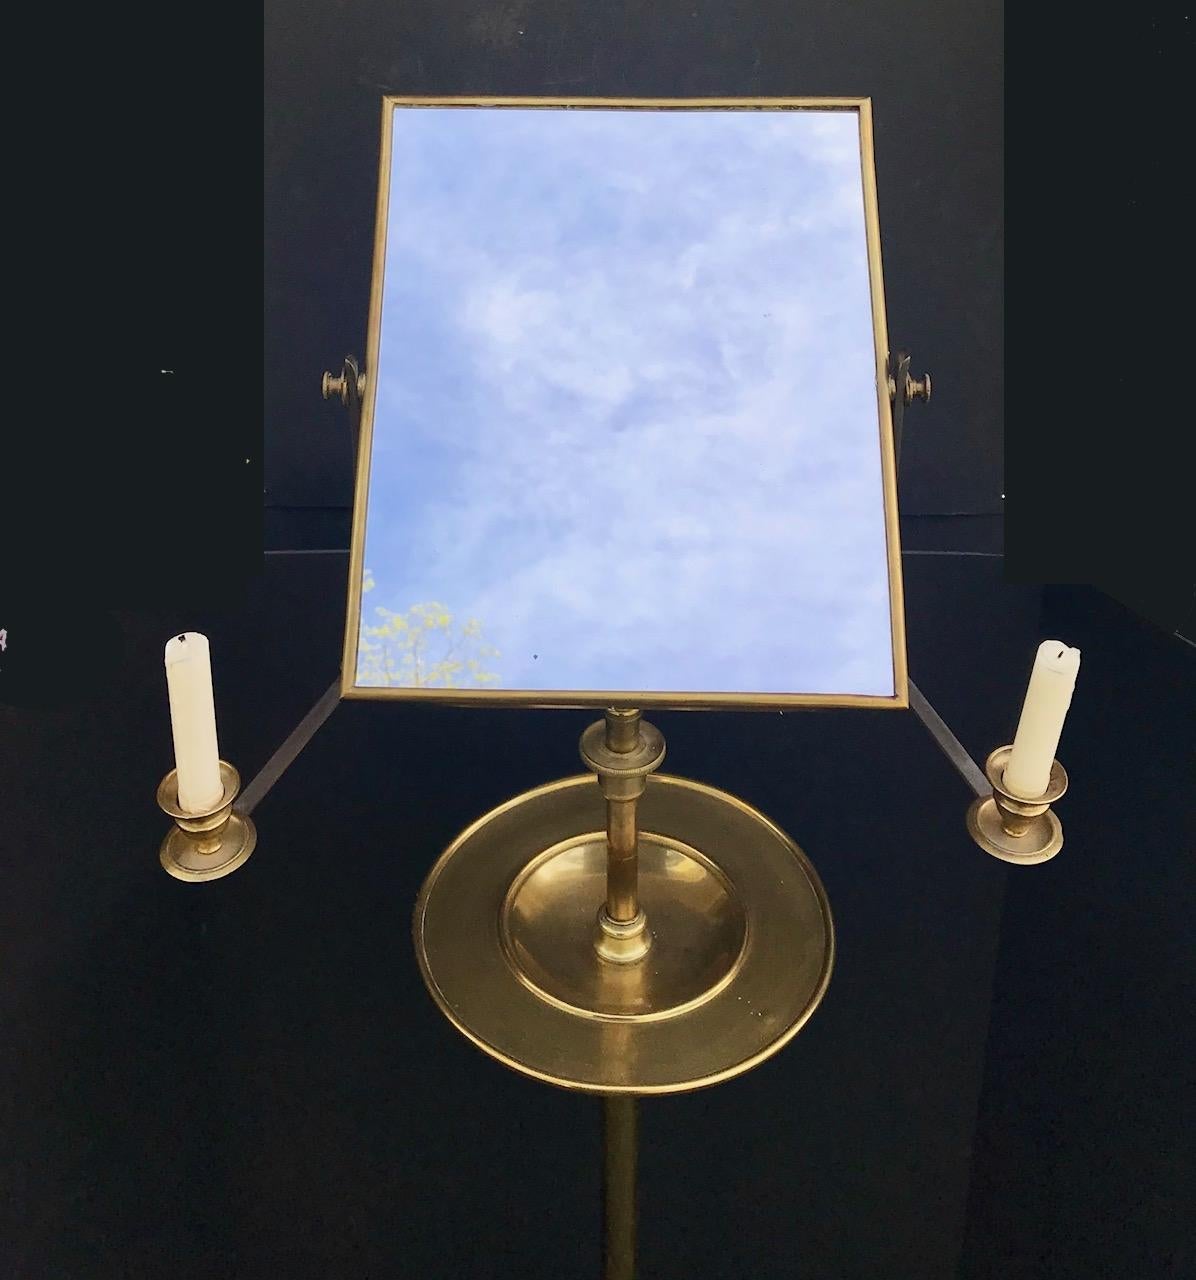 This gentleman's English Campaign shaving stand and mirror is from the 19th century and barely shows any wear. It is freestanding and the mirror adjusts to move up and down telescopically. Attached are a brass bowl and a moving candle holder on each